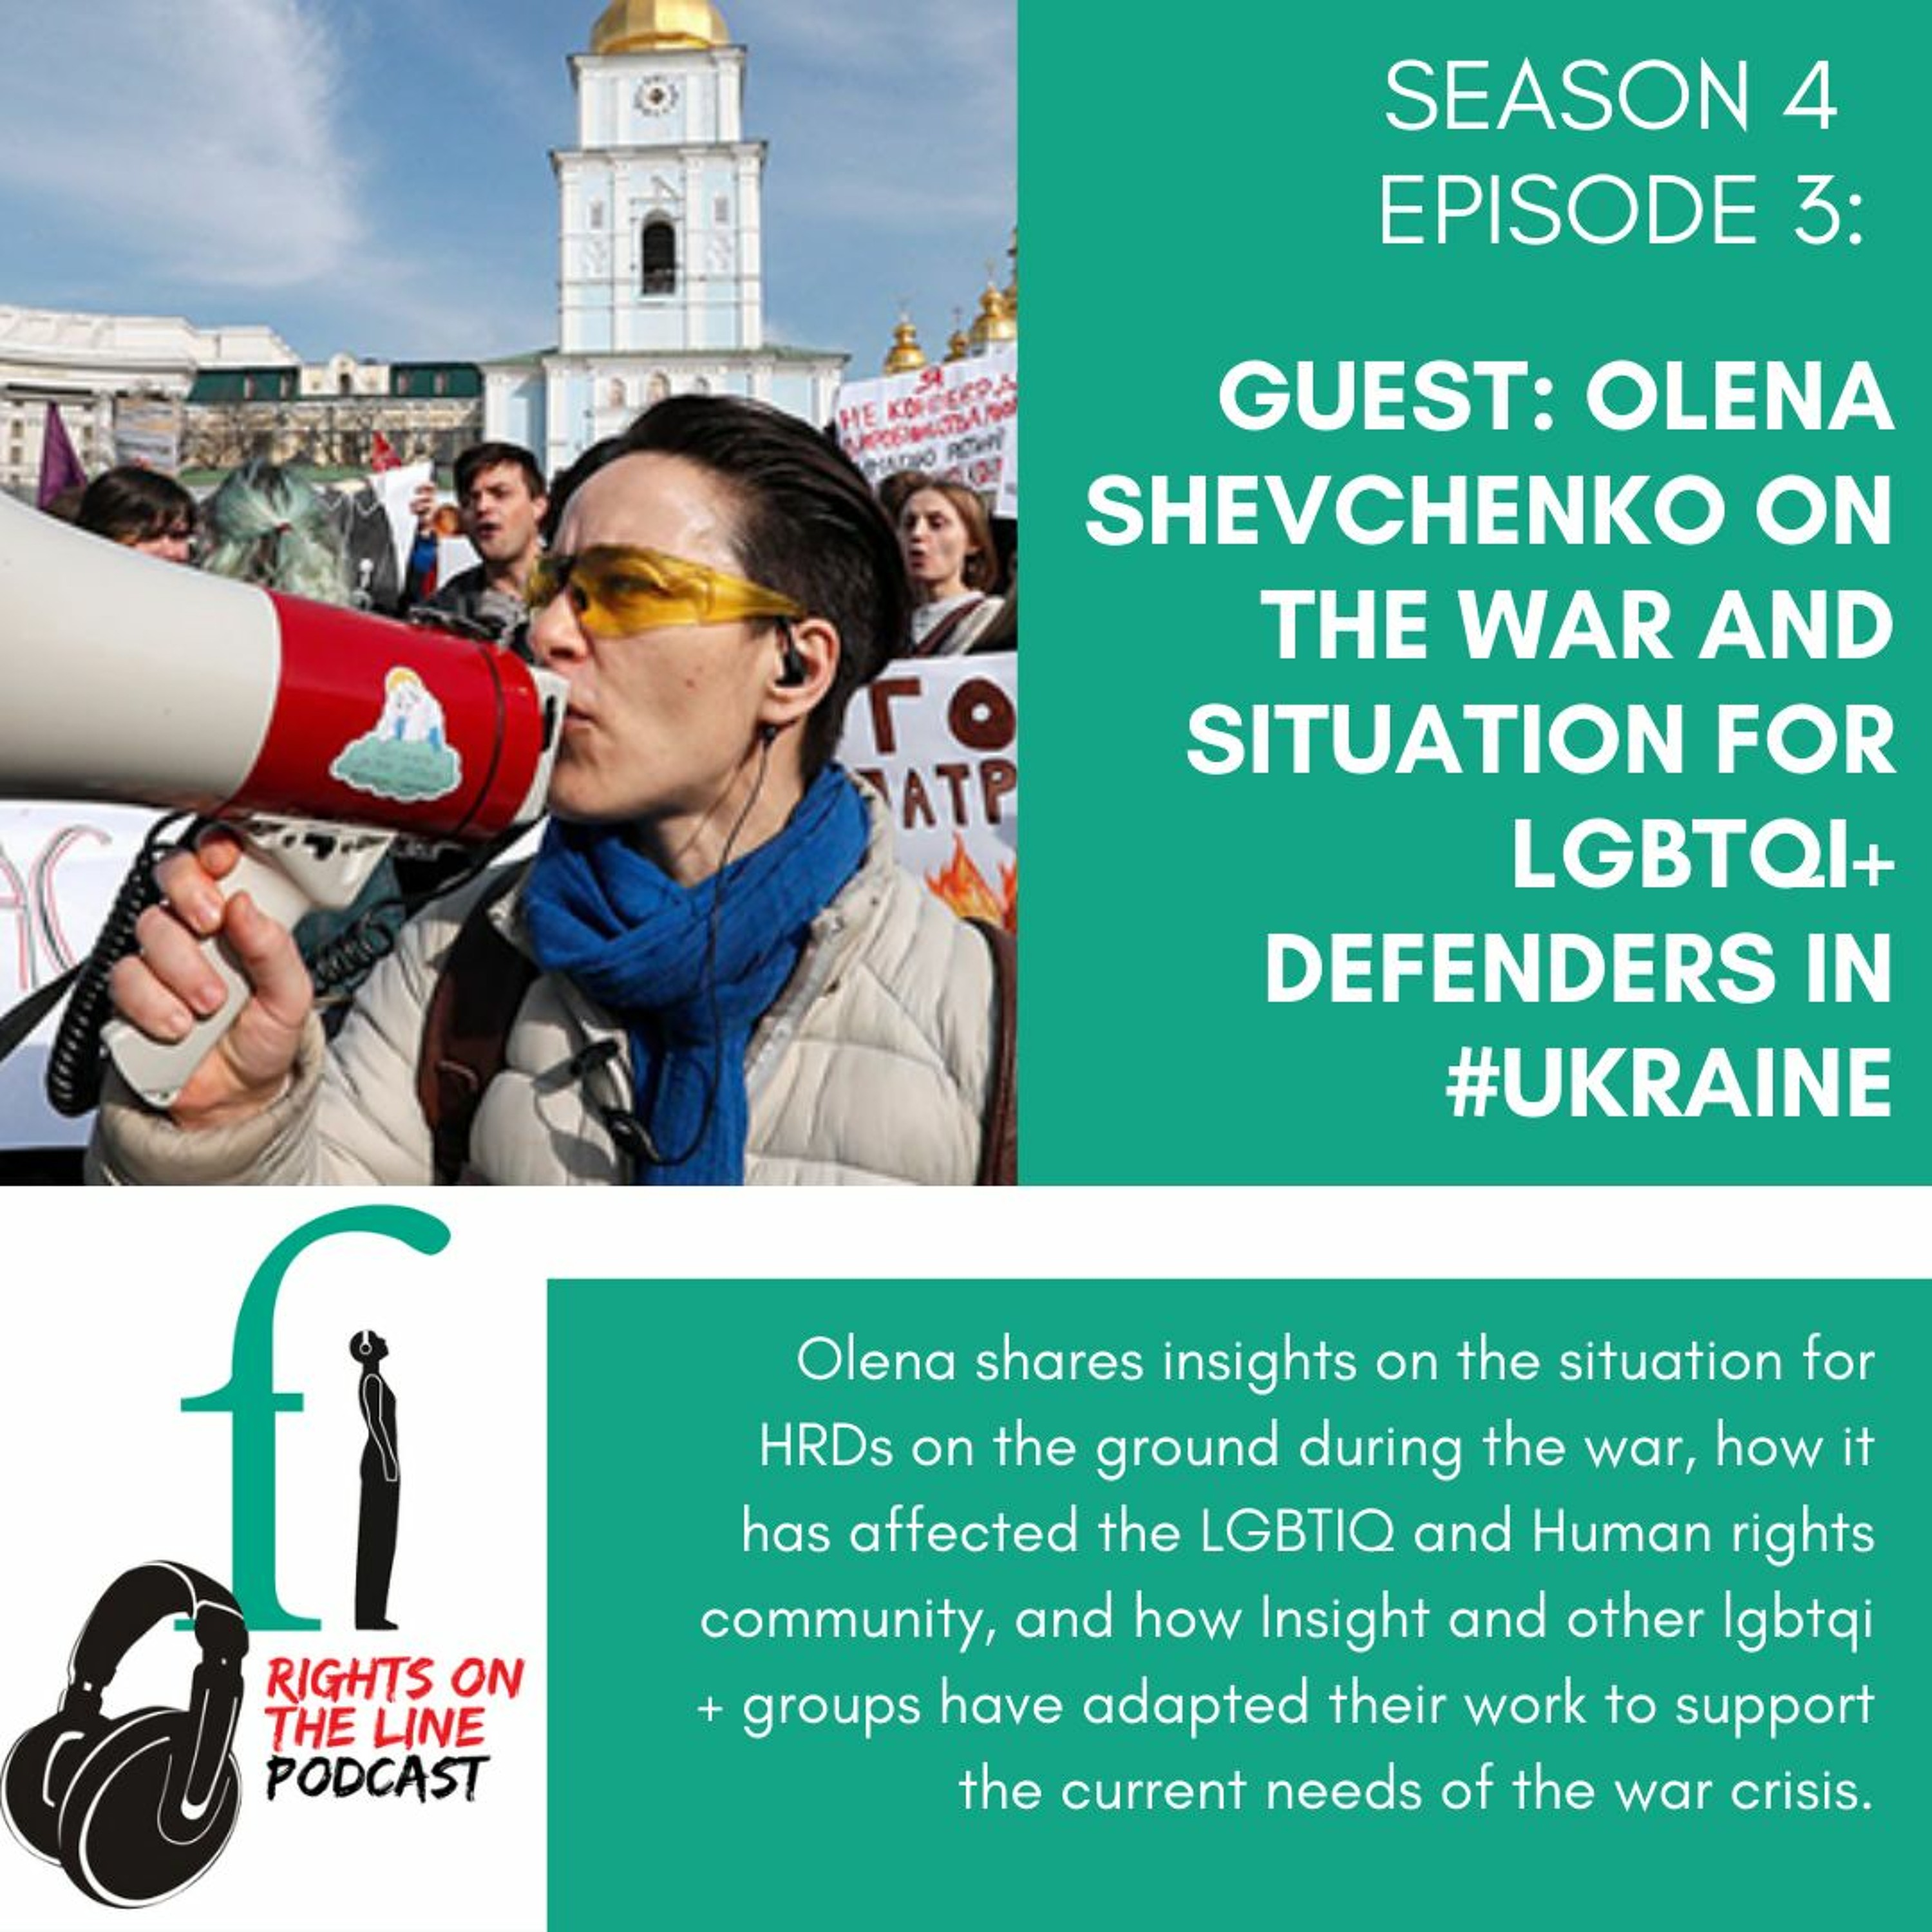 Olena Shevchenko on the war and situation for lgbtqi+ defenders in #Ukraine